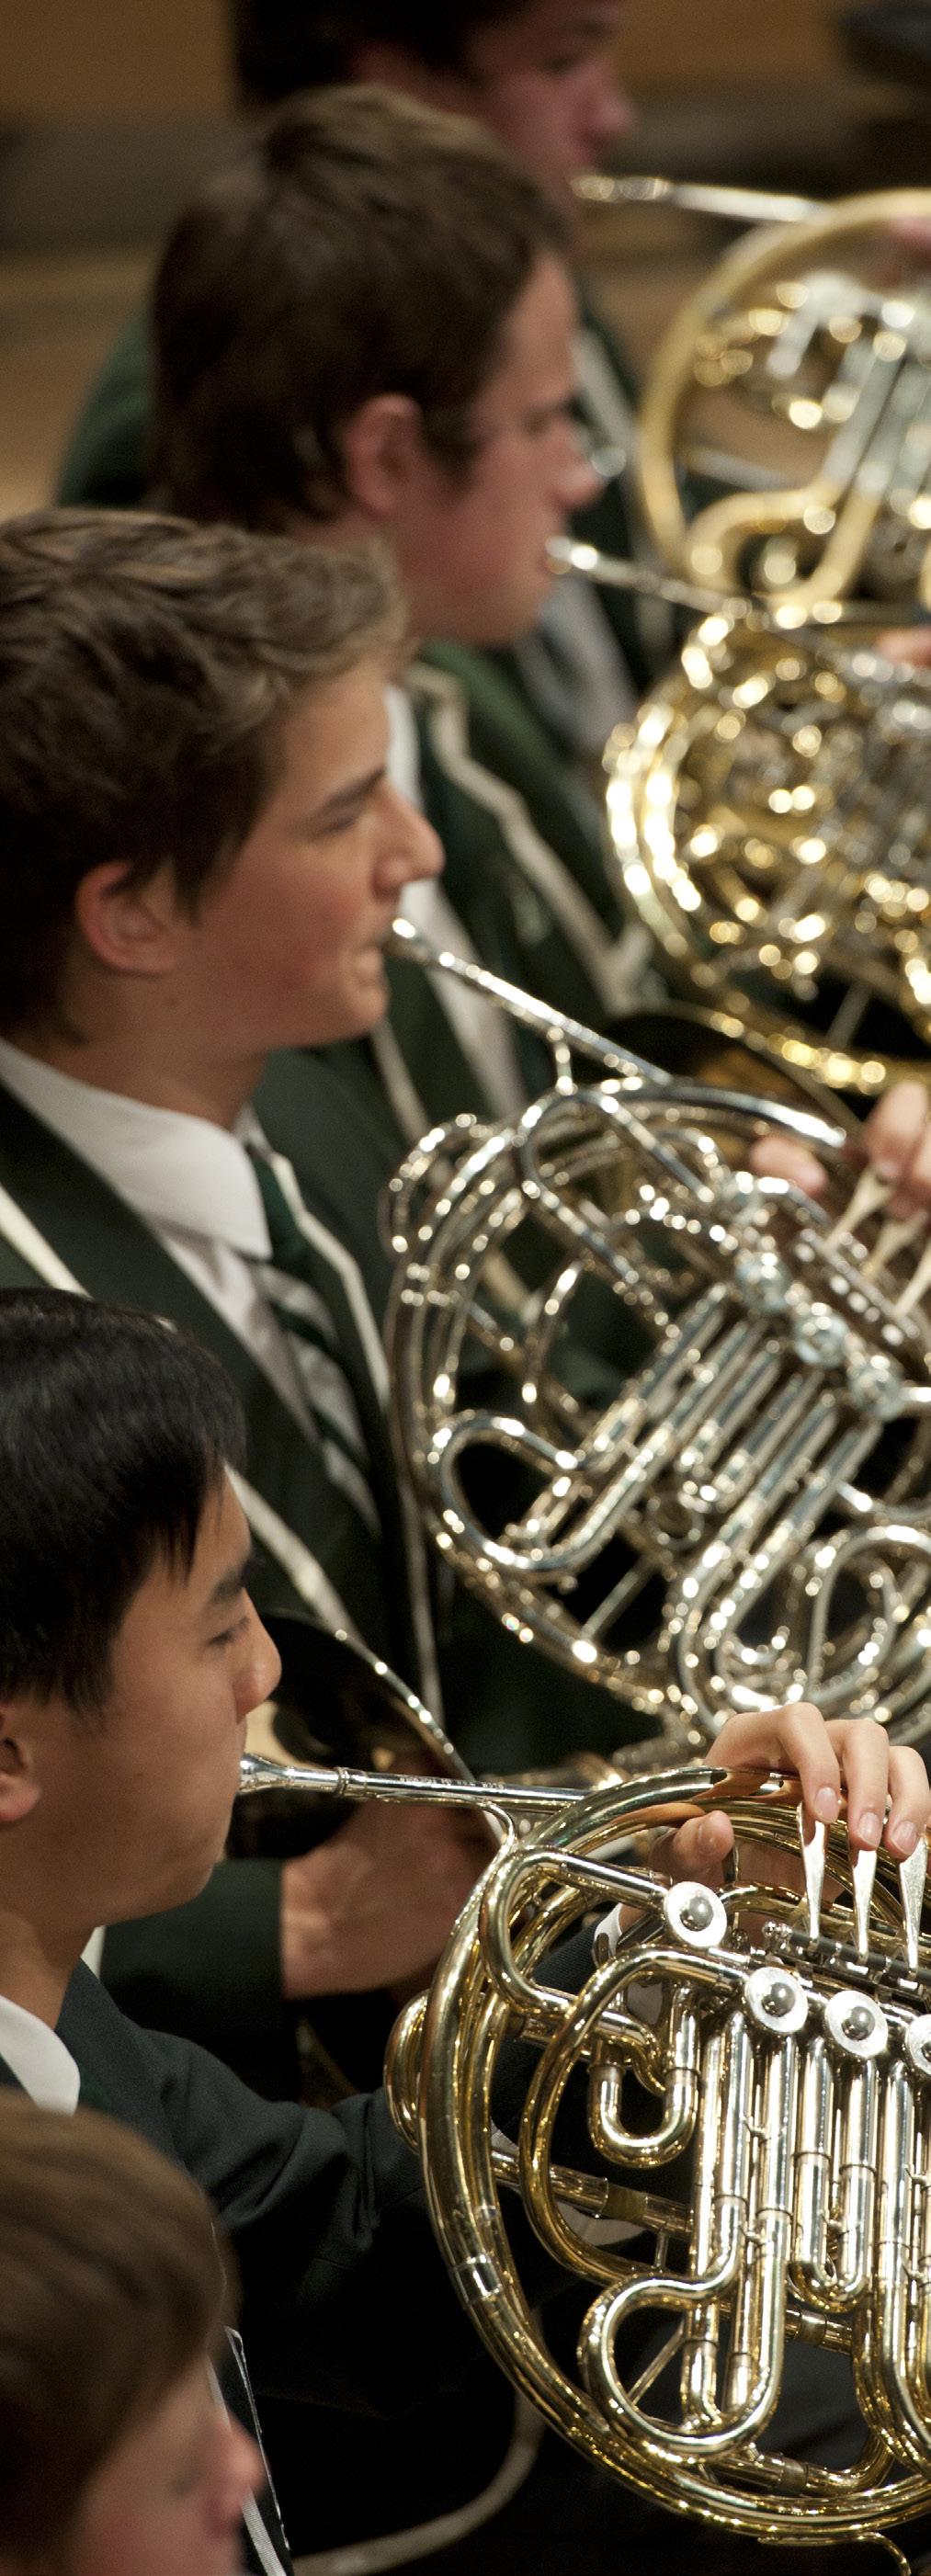 The Trinity Grammar School Music Groups include: Band Orchestral Choral Chamber Other Preparatory School Concert Band Junior School Concert Band Intermediate Band Concert Band Symphonic Wind Band /